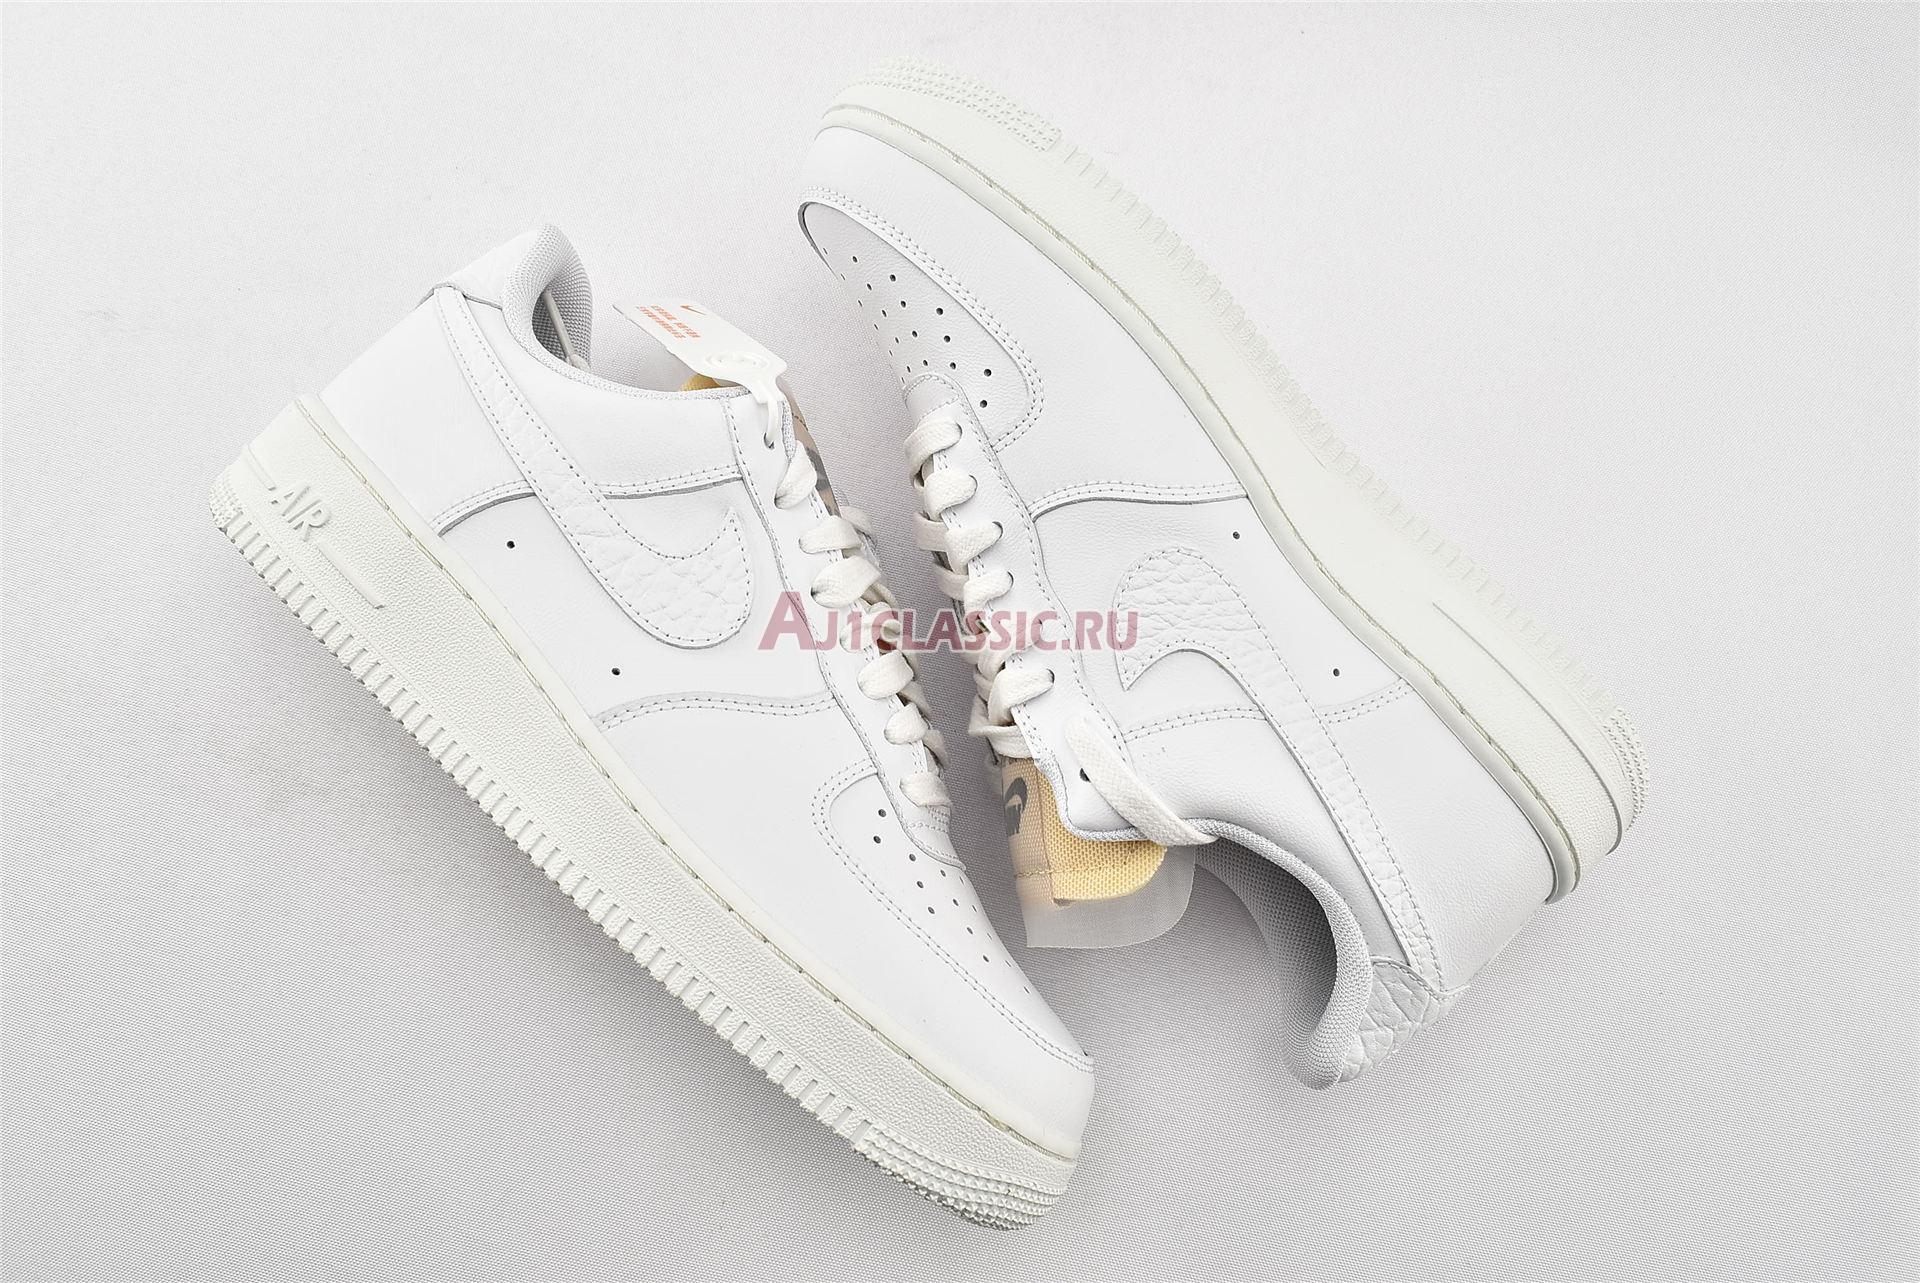 Nike Air Force 1 Low 07 LX "Bling" CZ8101-100